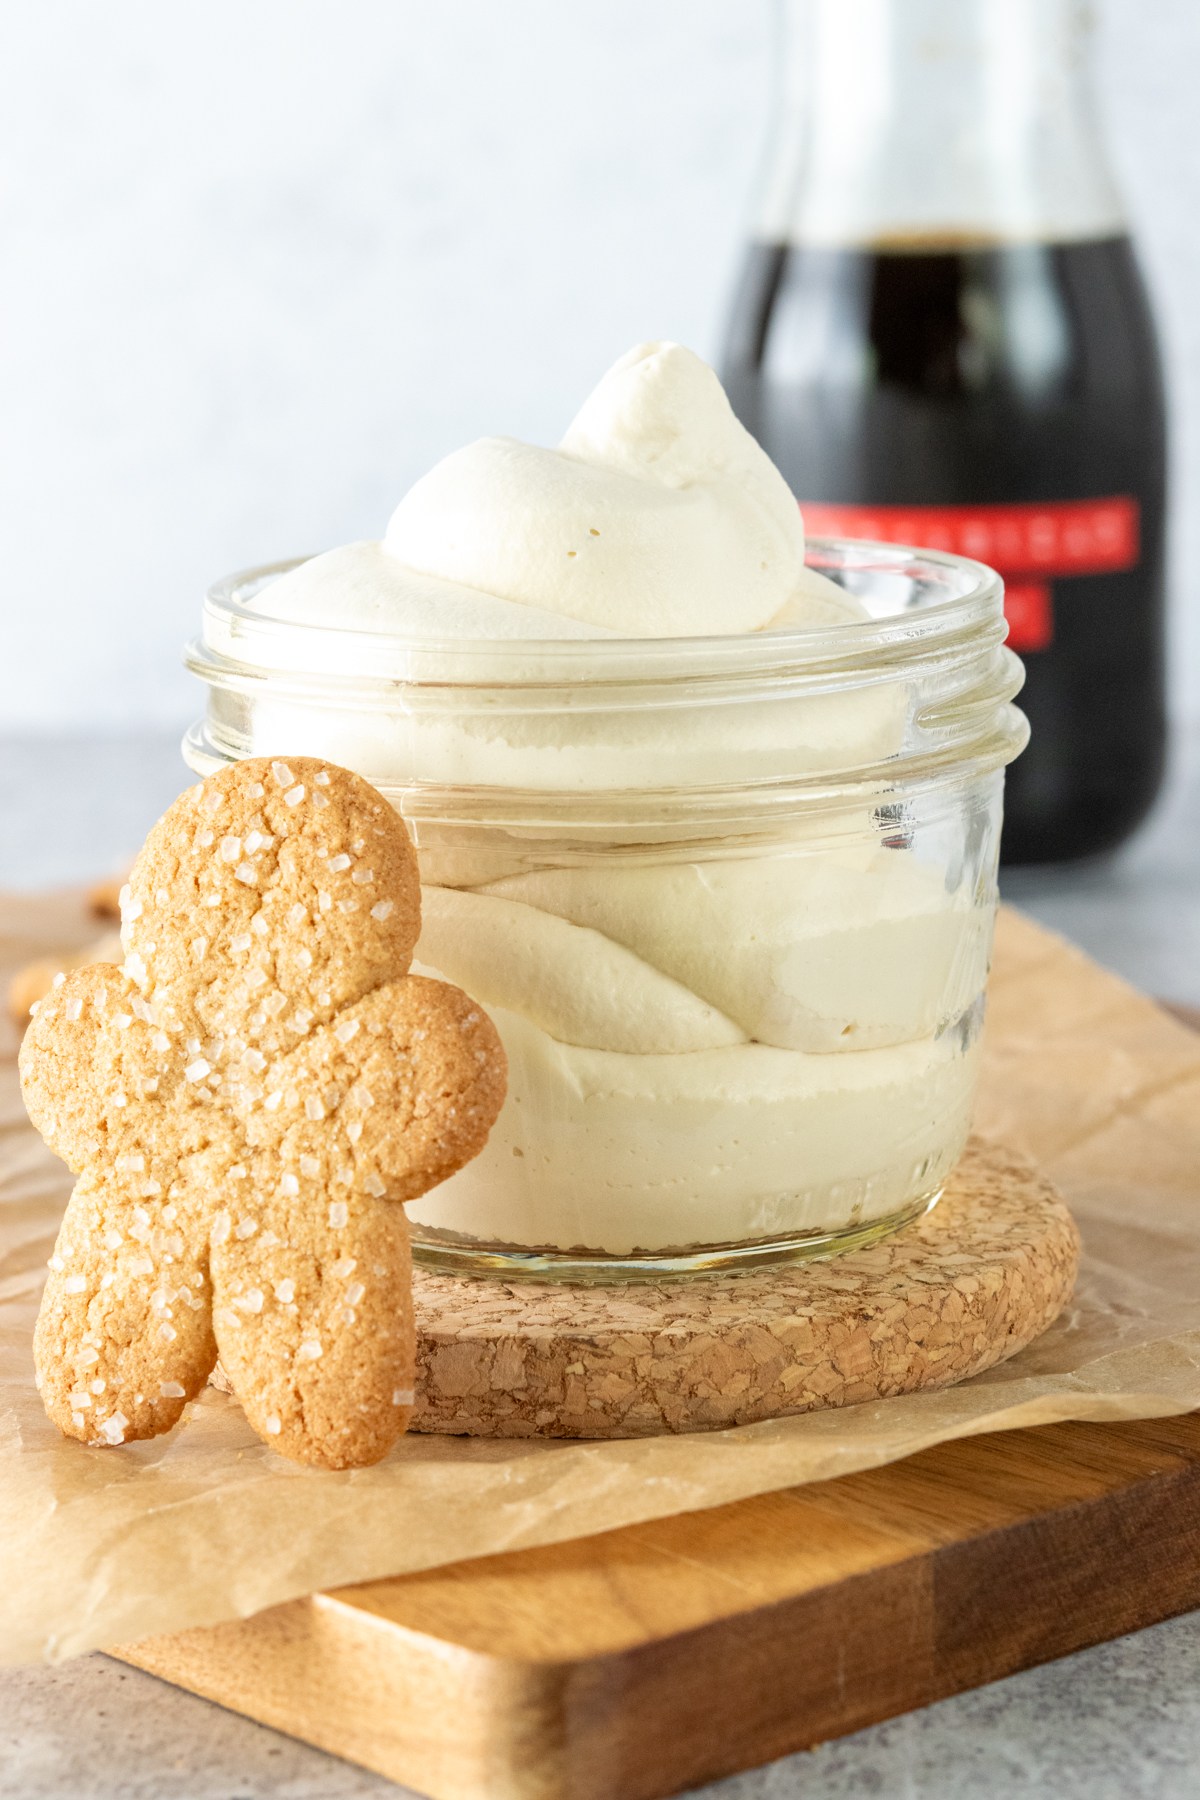 Homemade gingerbread whipped cream in front of a bottle of gingerbread syrup and with a gingerbread cookie leaning against jar of whipped cream.